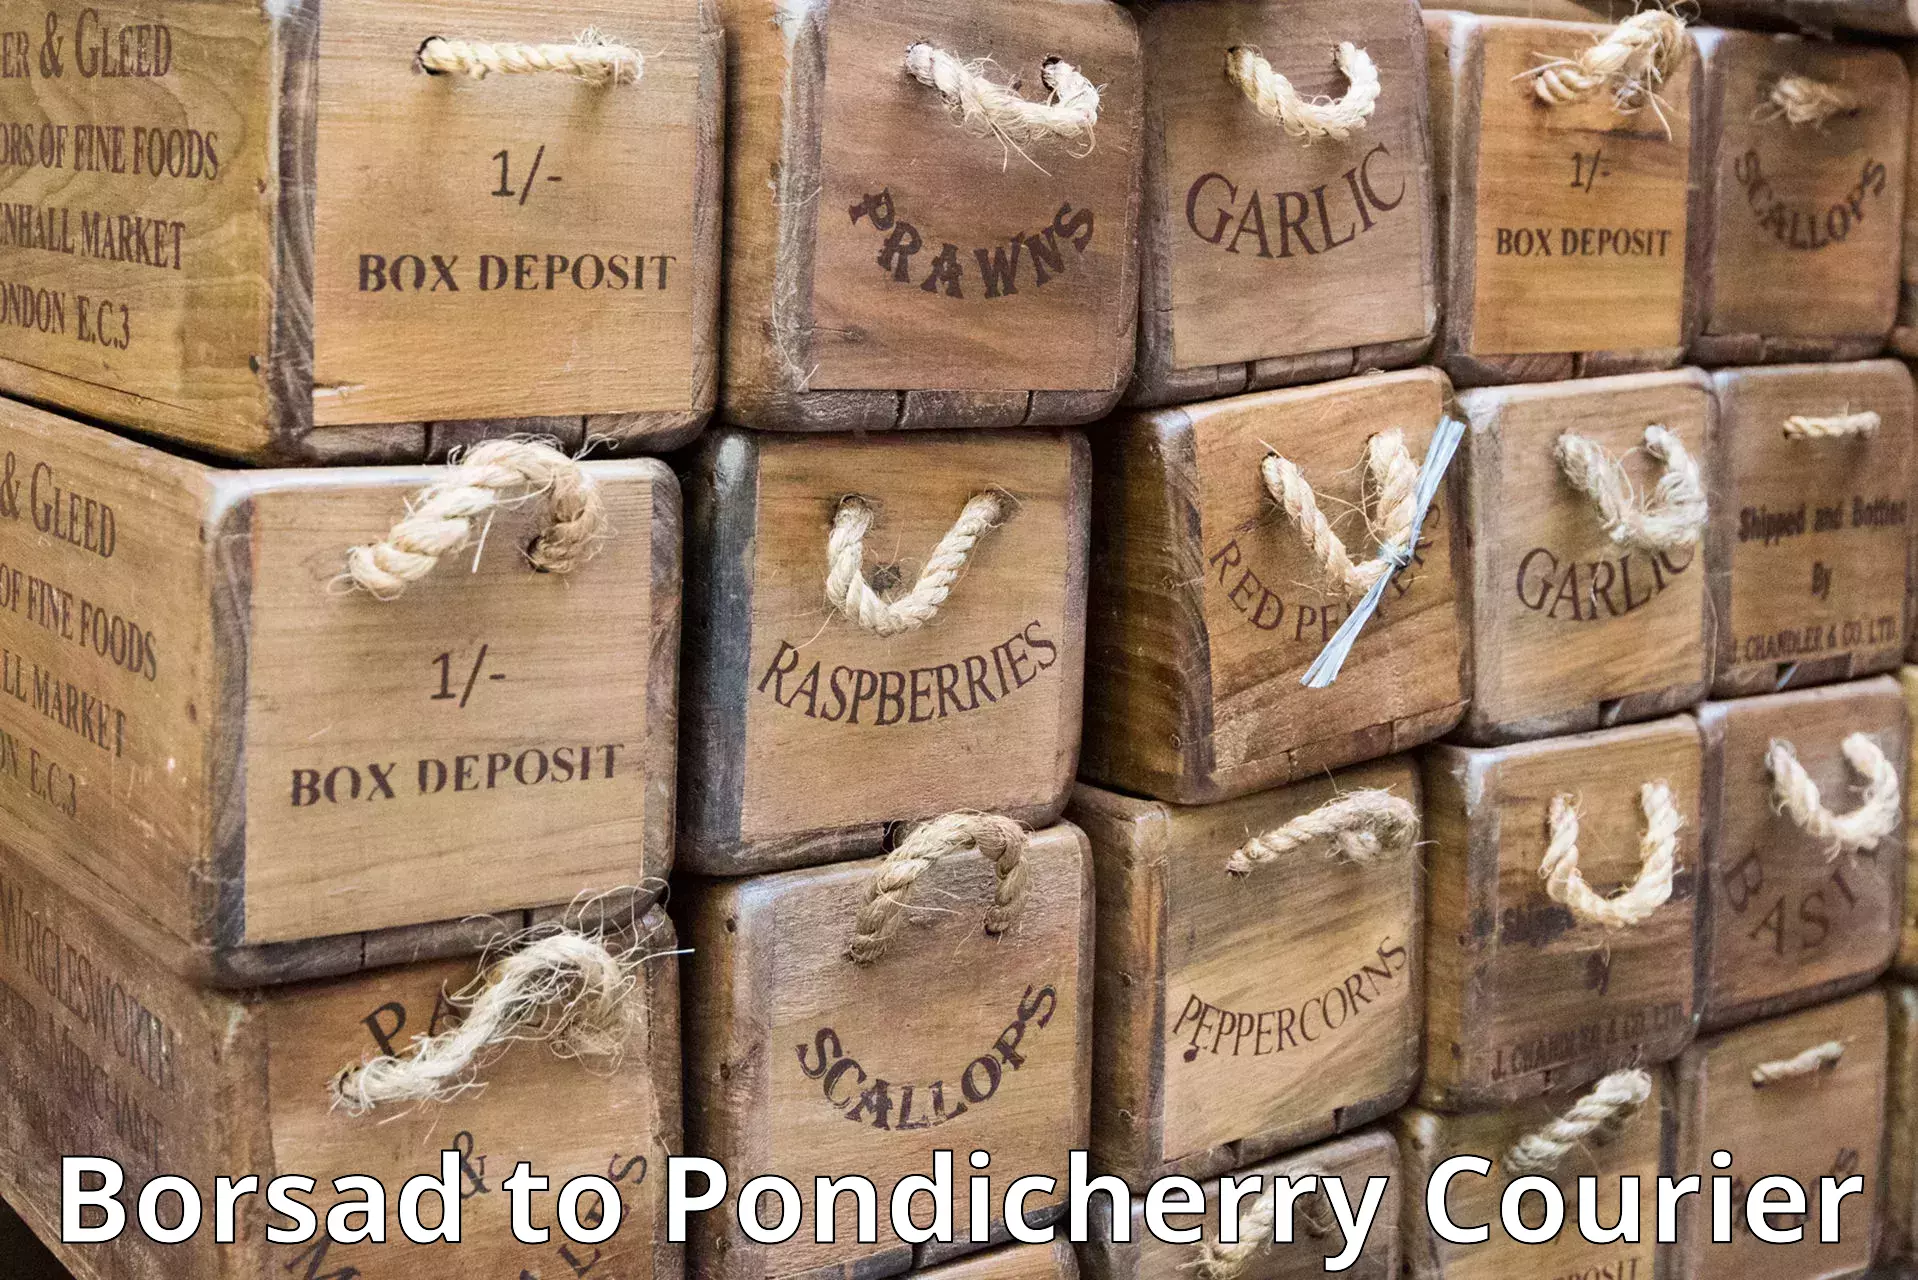 Next-day delivery options in Borsad to Pondicherry